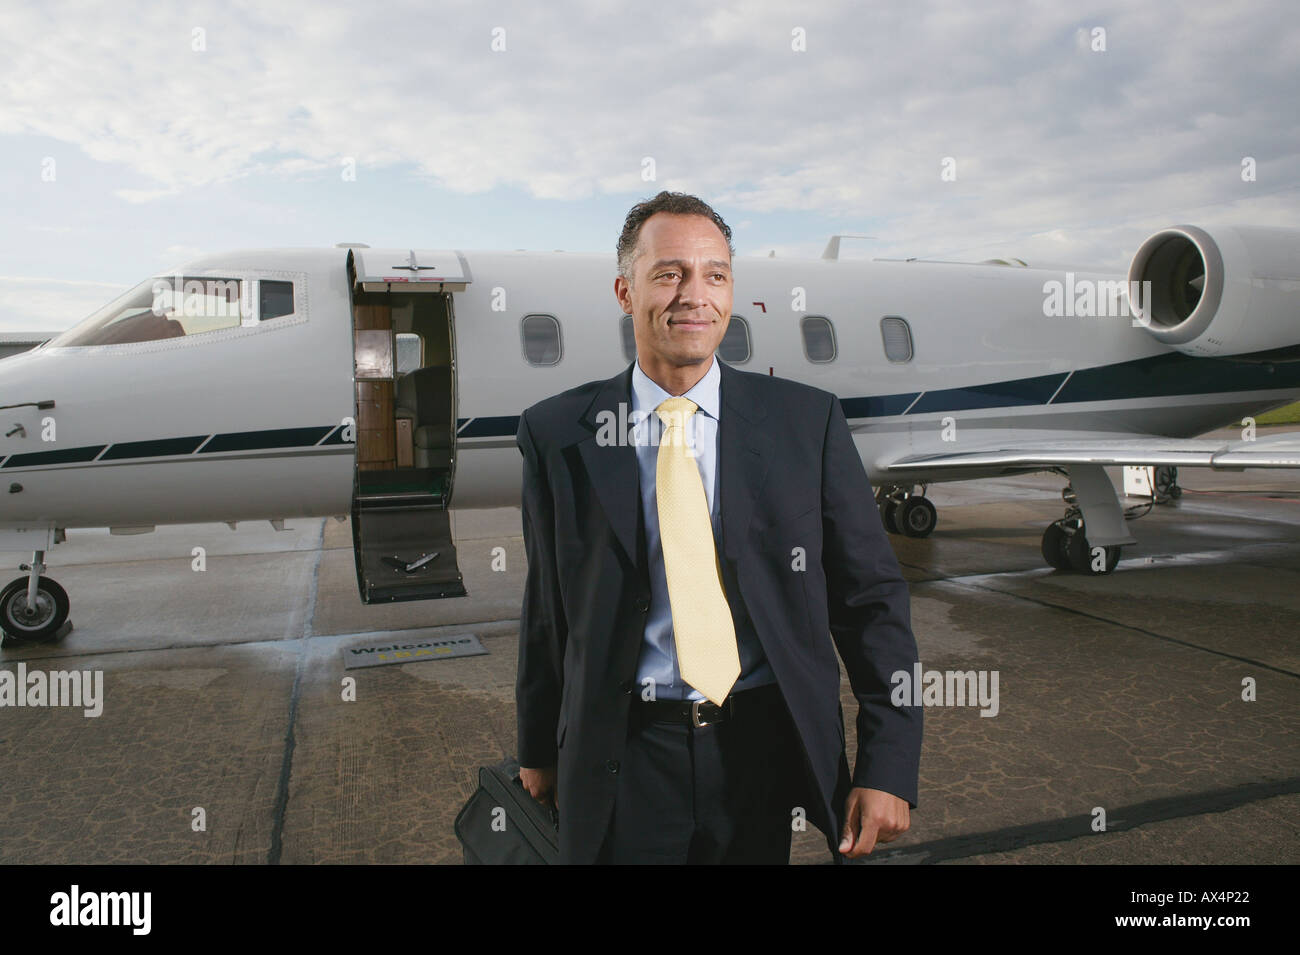 Businessman in front a private airplane Stock Photo